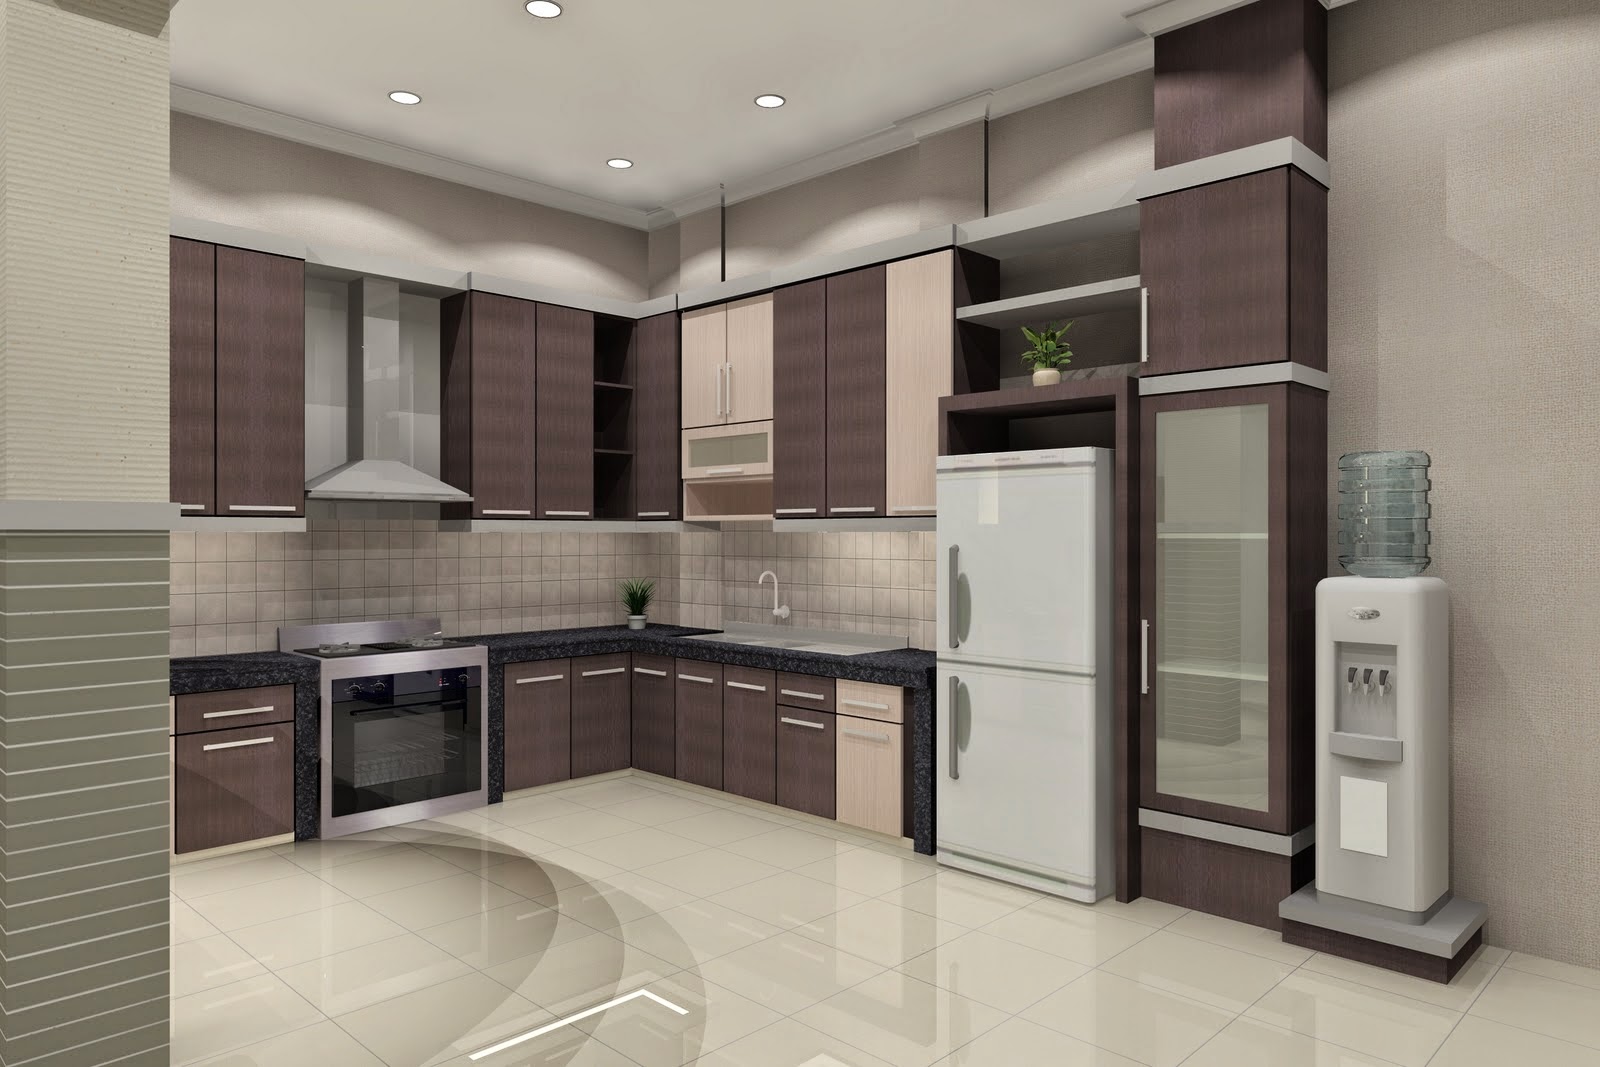 Examples of Simple Minimalist Kitchen Design New 2015 